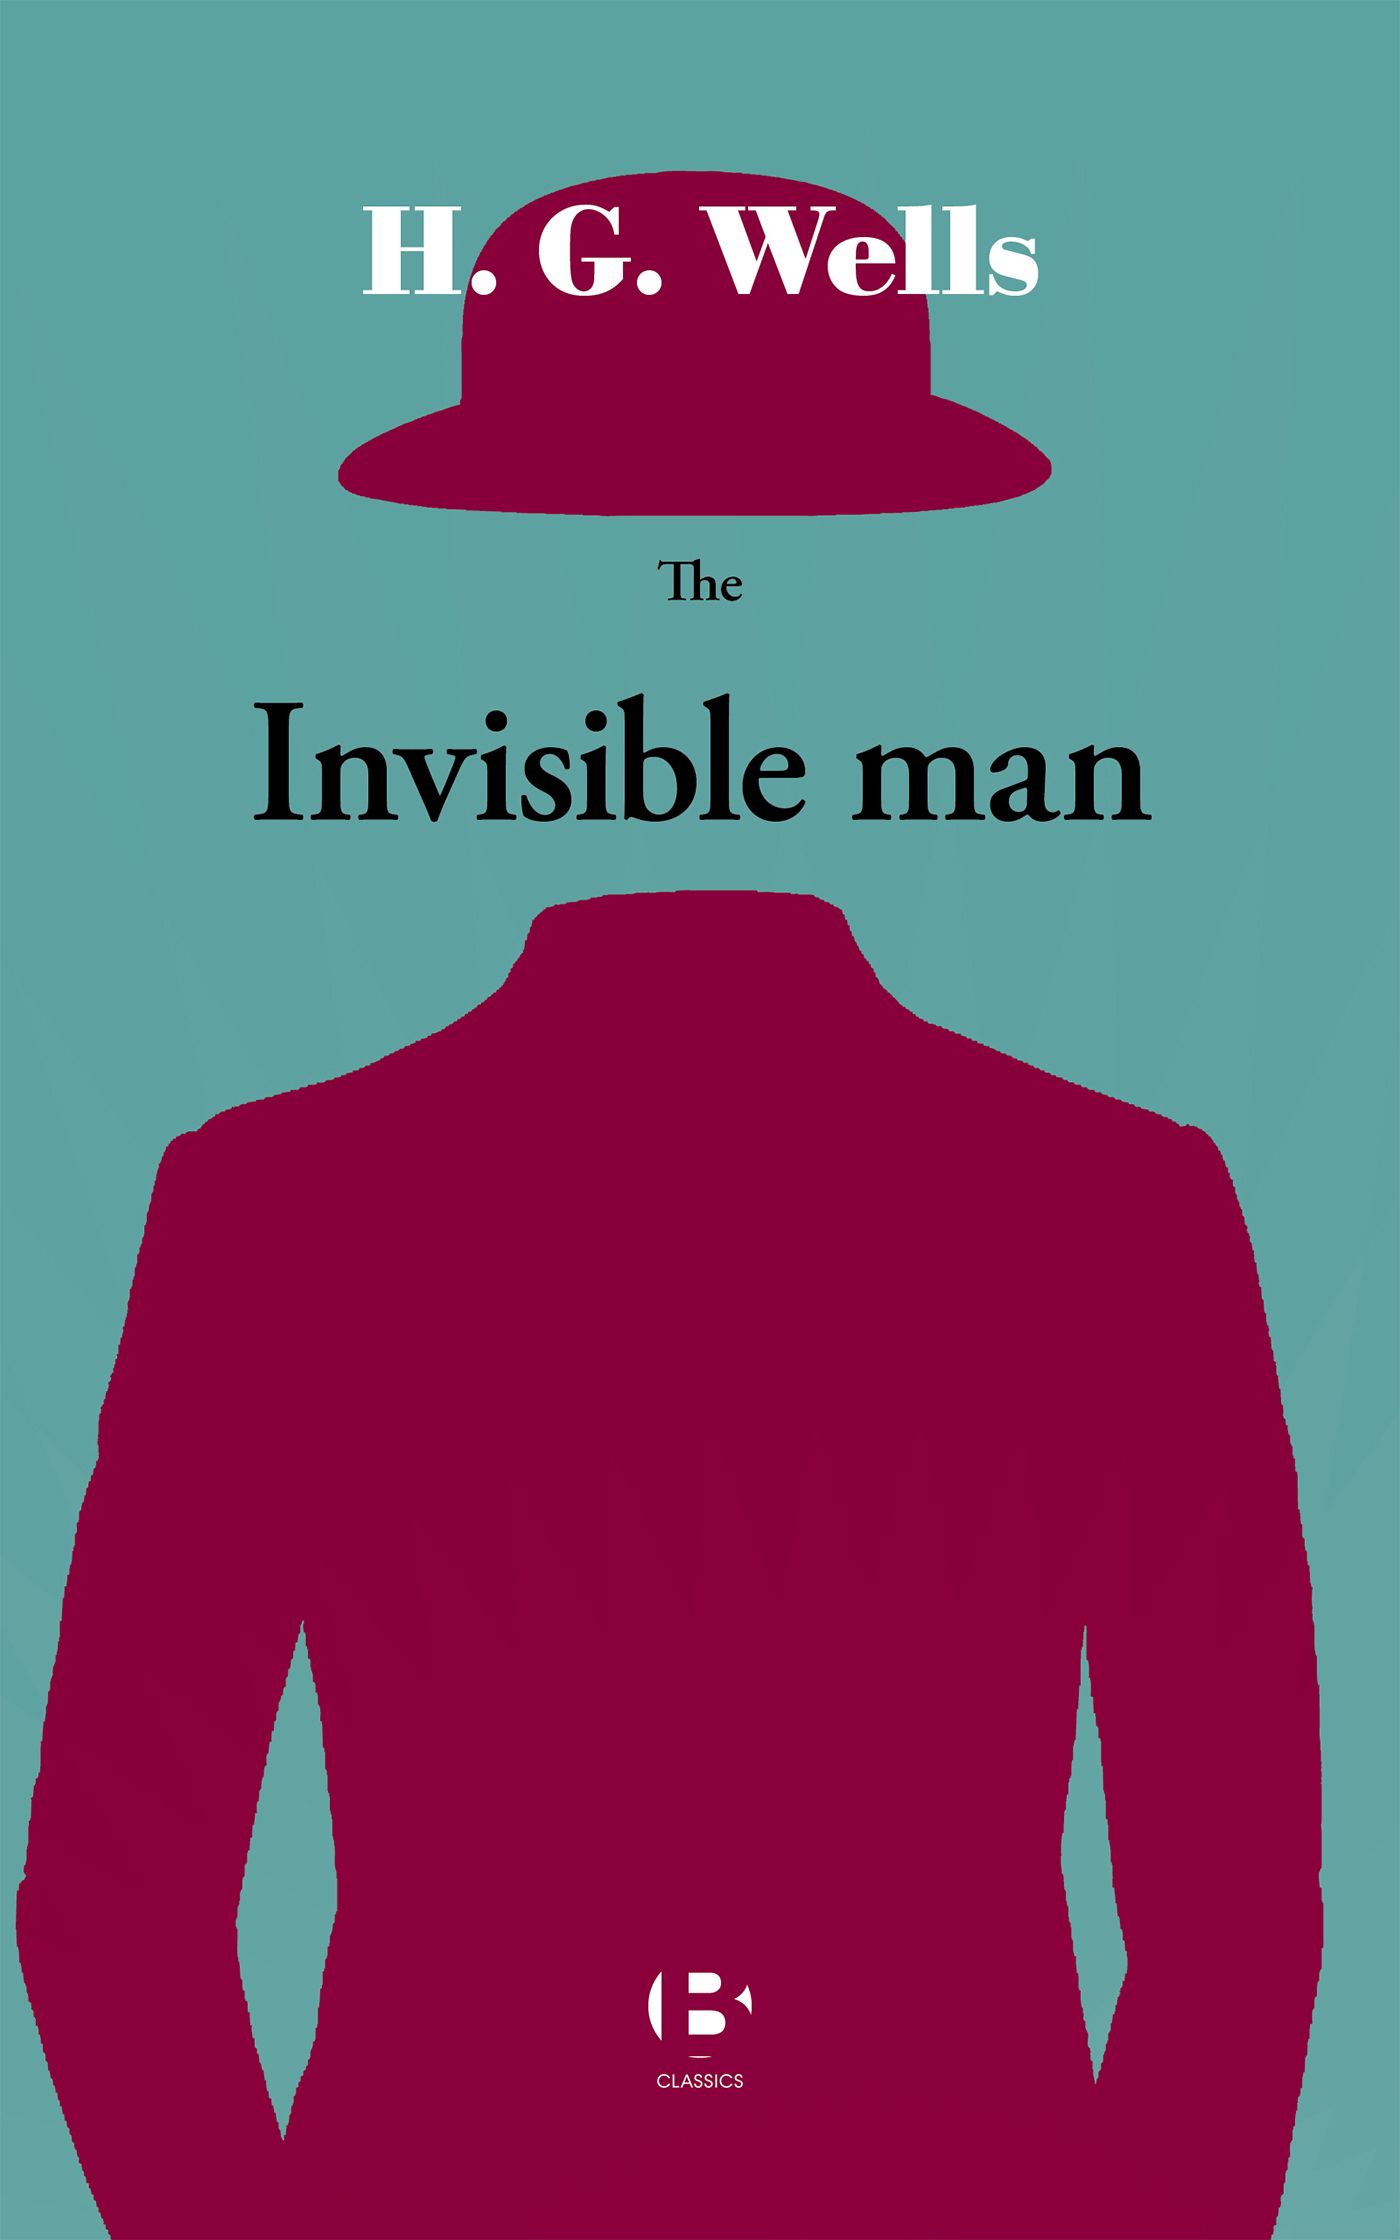 The Invisible Man, eBook by H. G. Wells